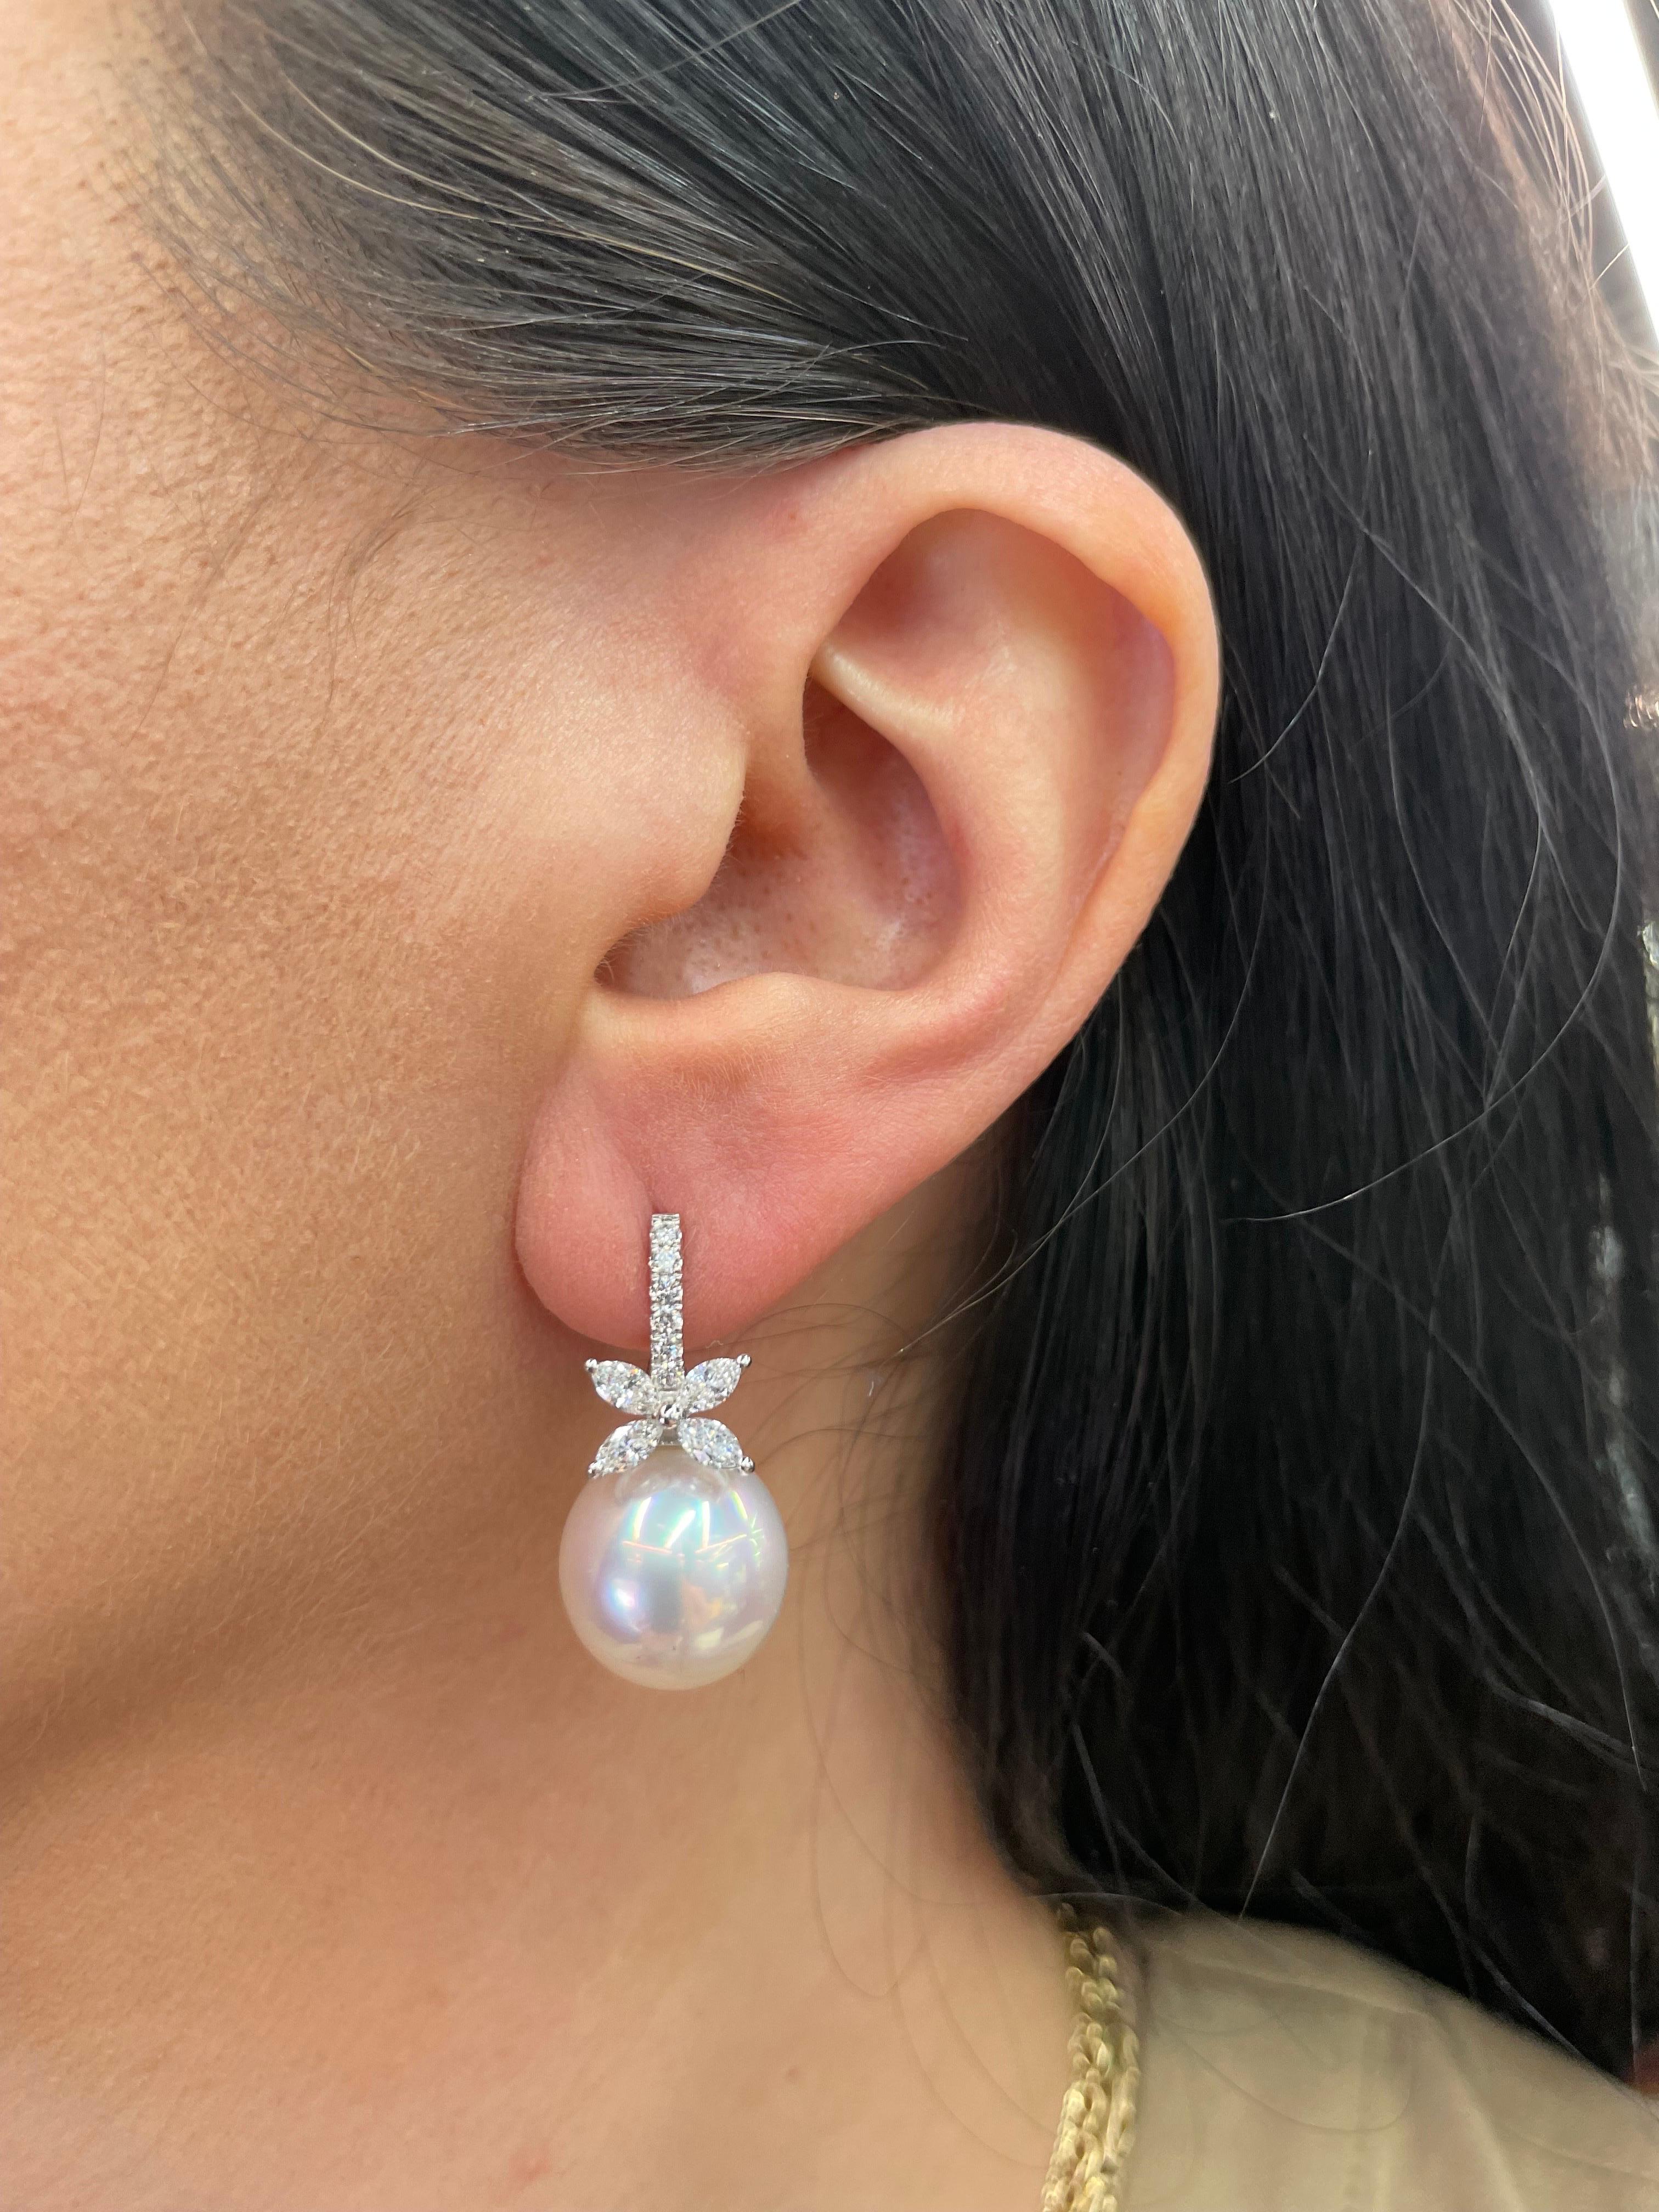 18 Karat White gold drop earrings featuring a diamond floral motif with 8 Marquise Diamonds weighing 0.79 Carats, 13 round brilliants weighing 0.17 carats and two South Sea Pearls measuring 13-14 MM
Color G-H
Clarity SI

Pearls can be changed to